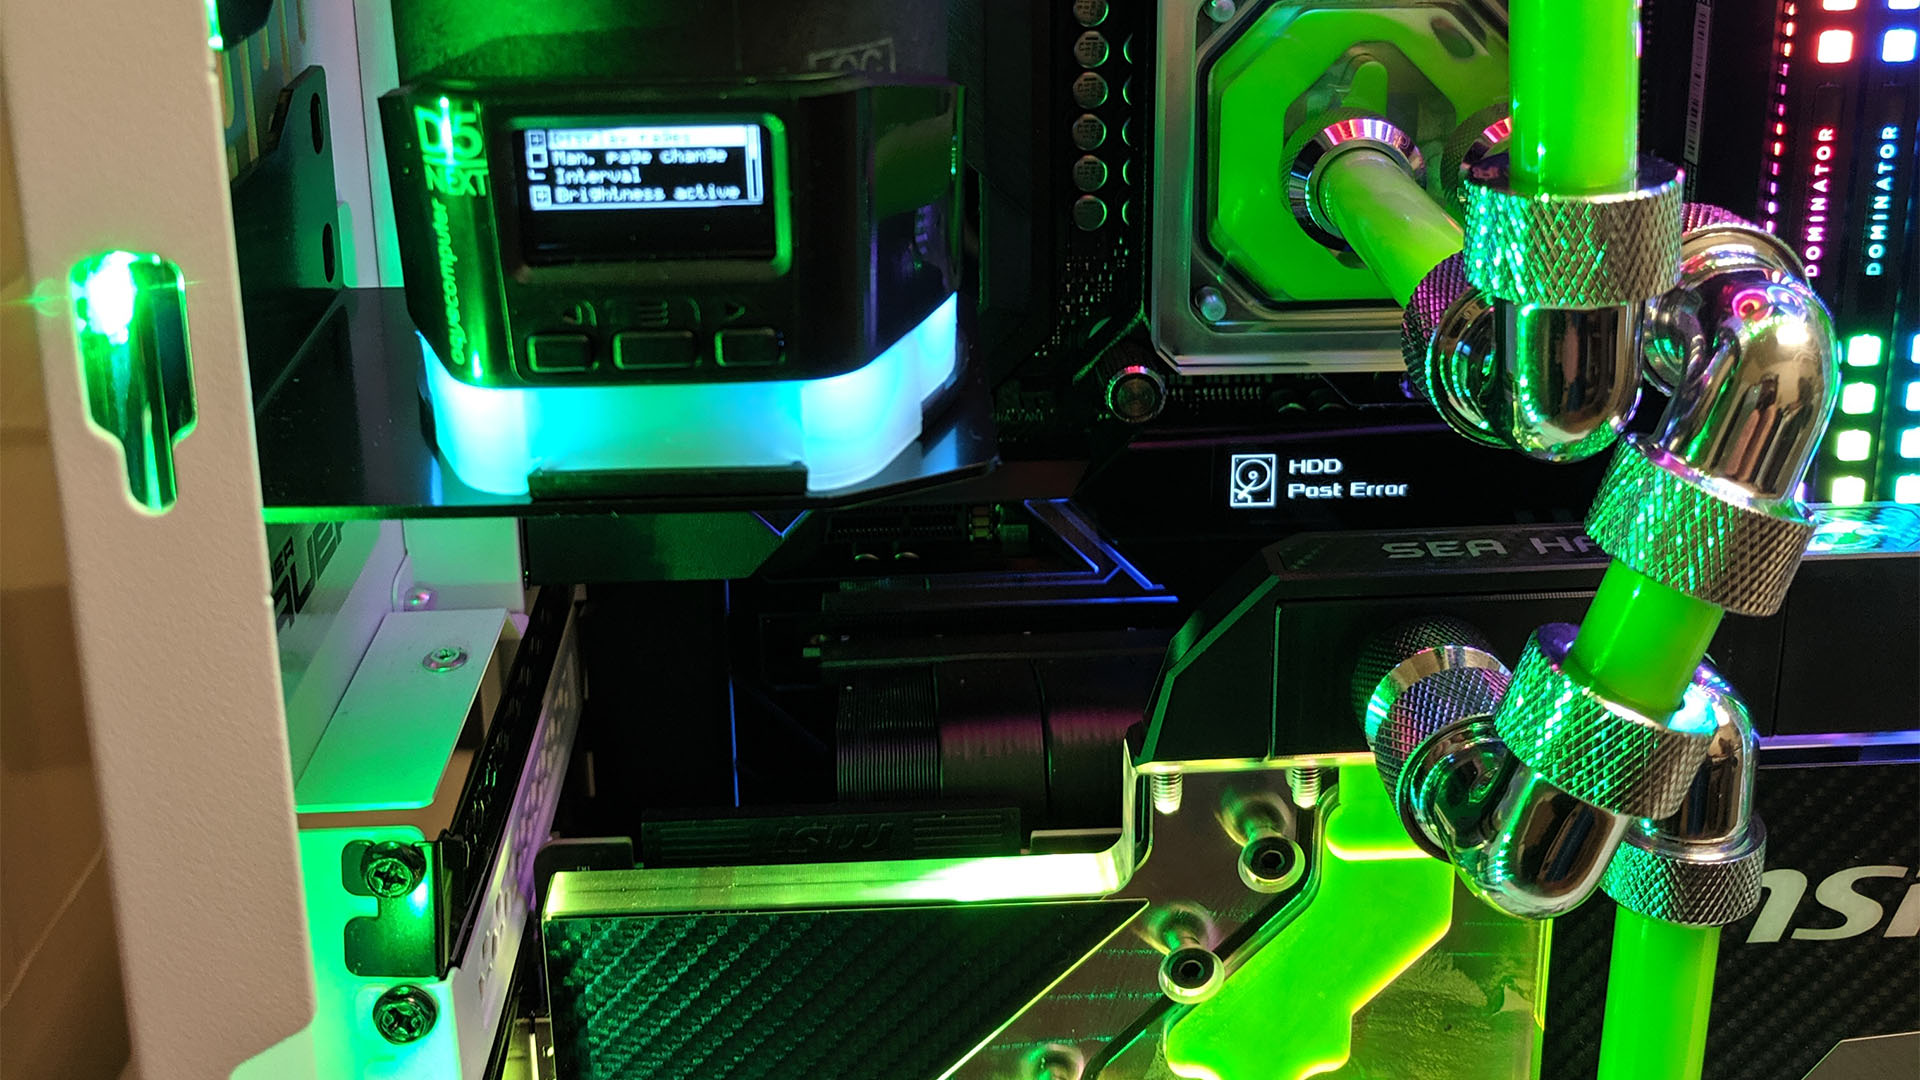 The green custom water cooling loop inside the gaming PC